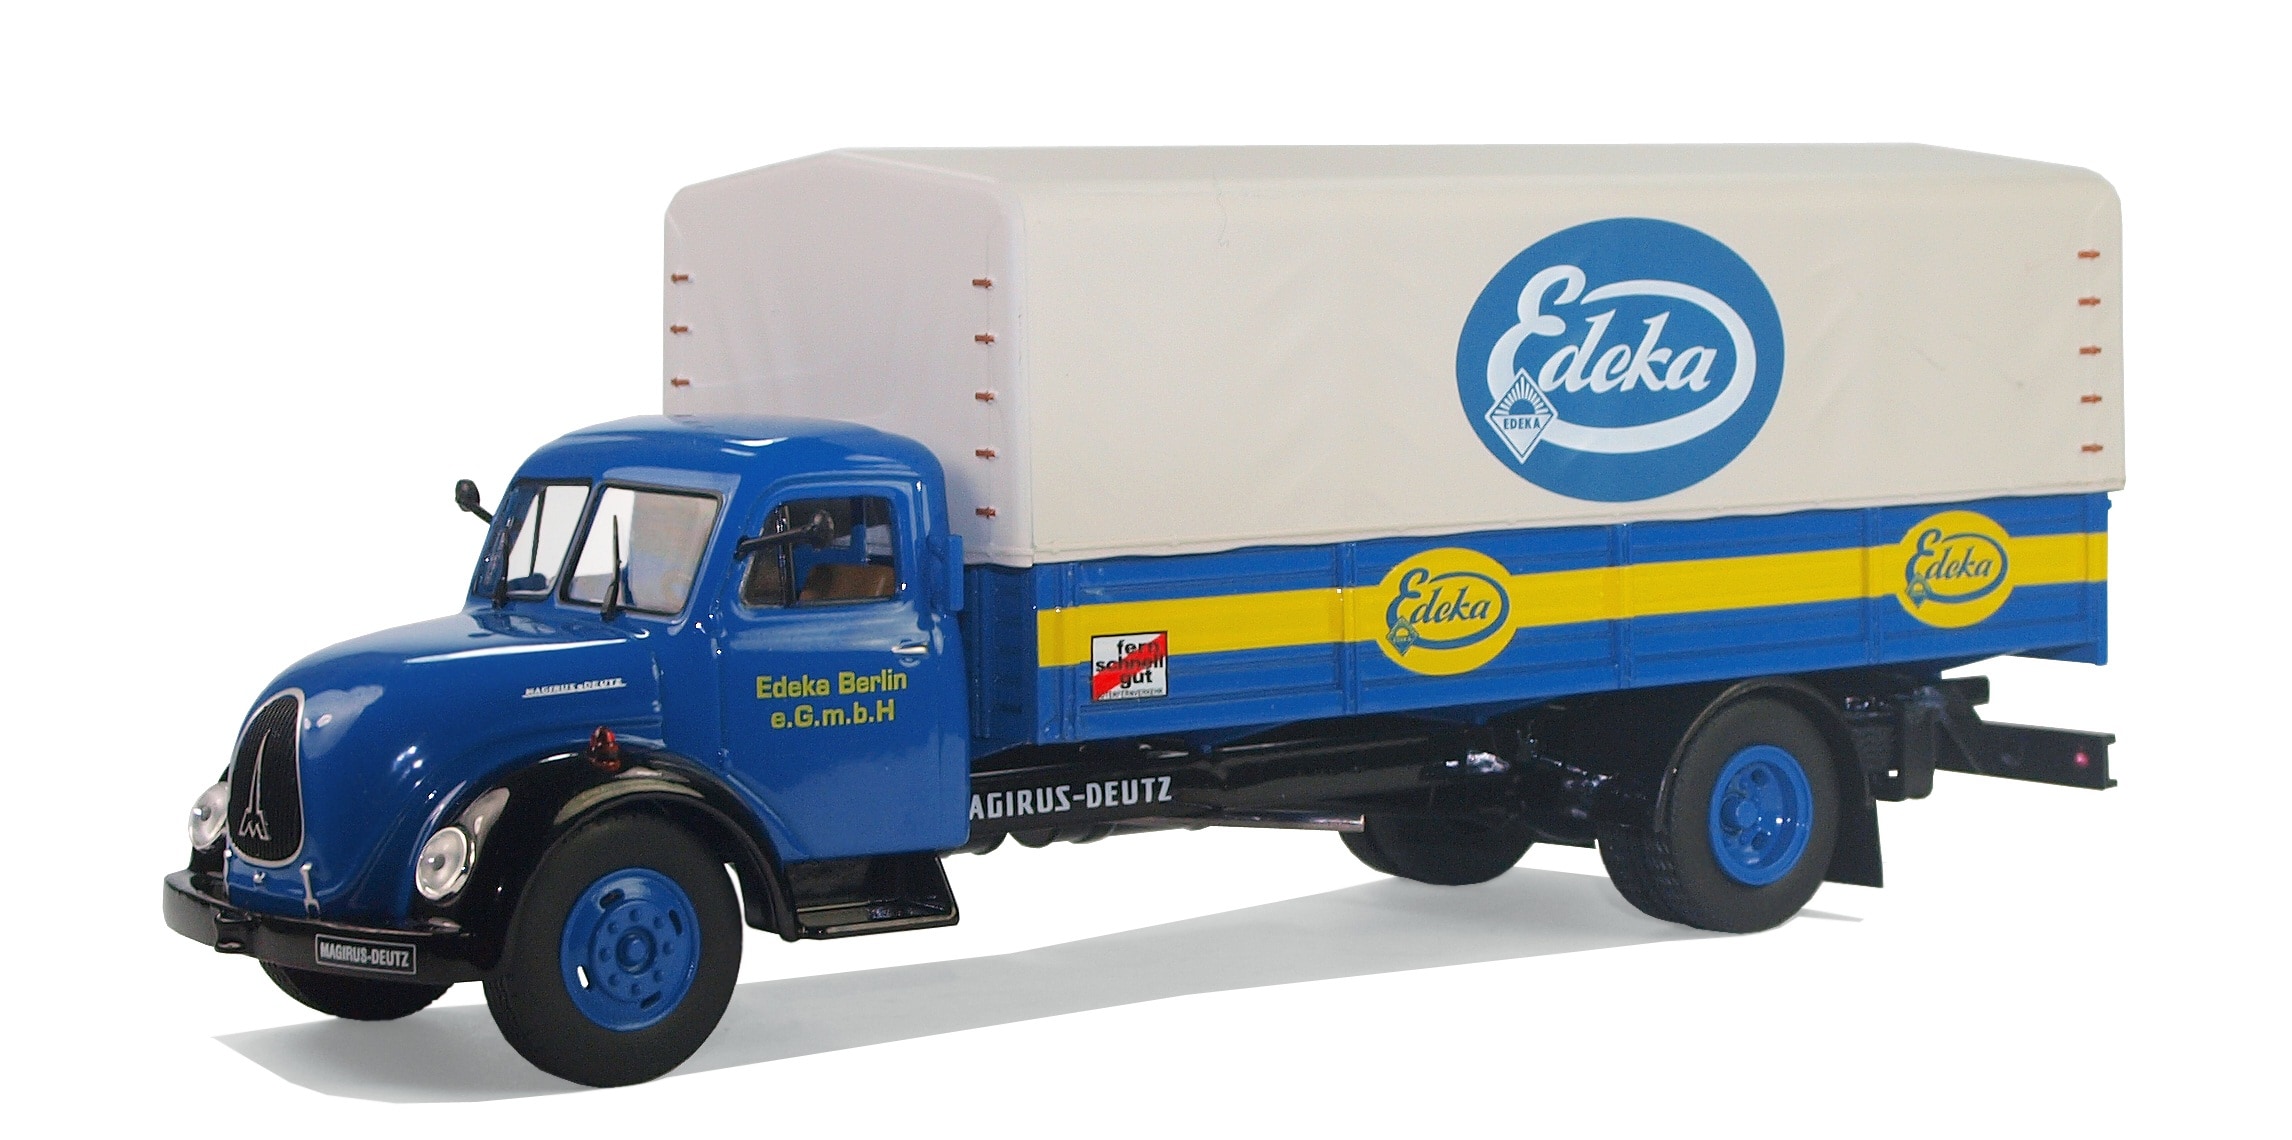 blue, white, and yellow Edeka boax truck toy